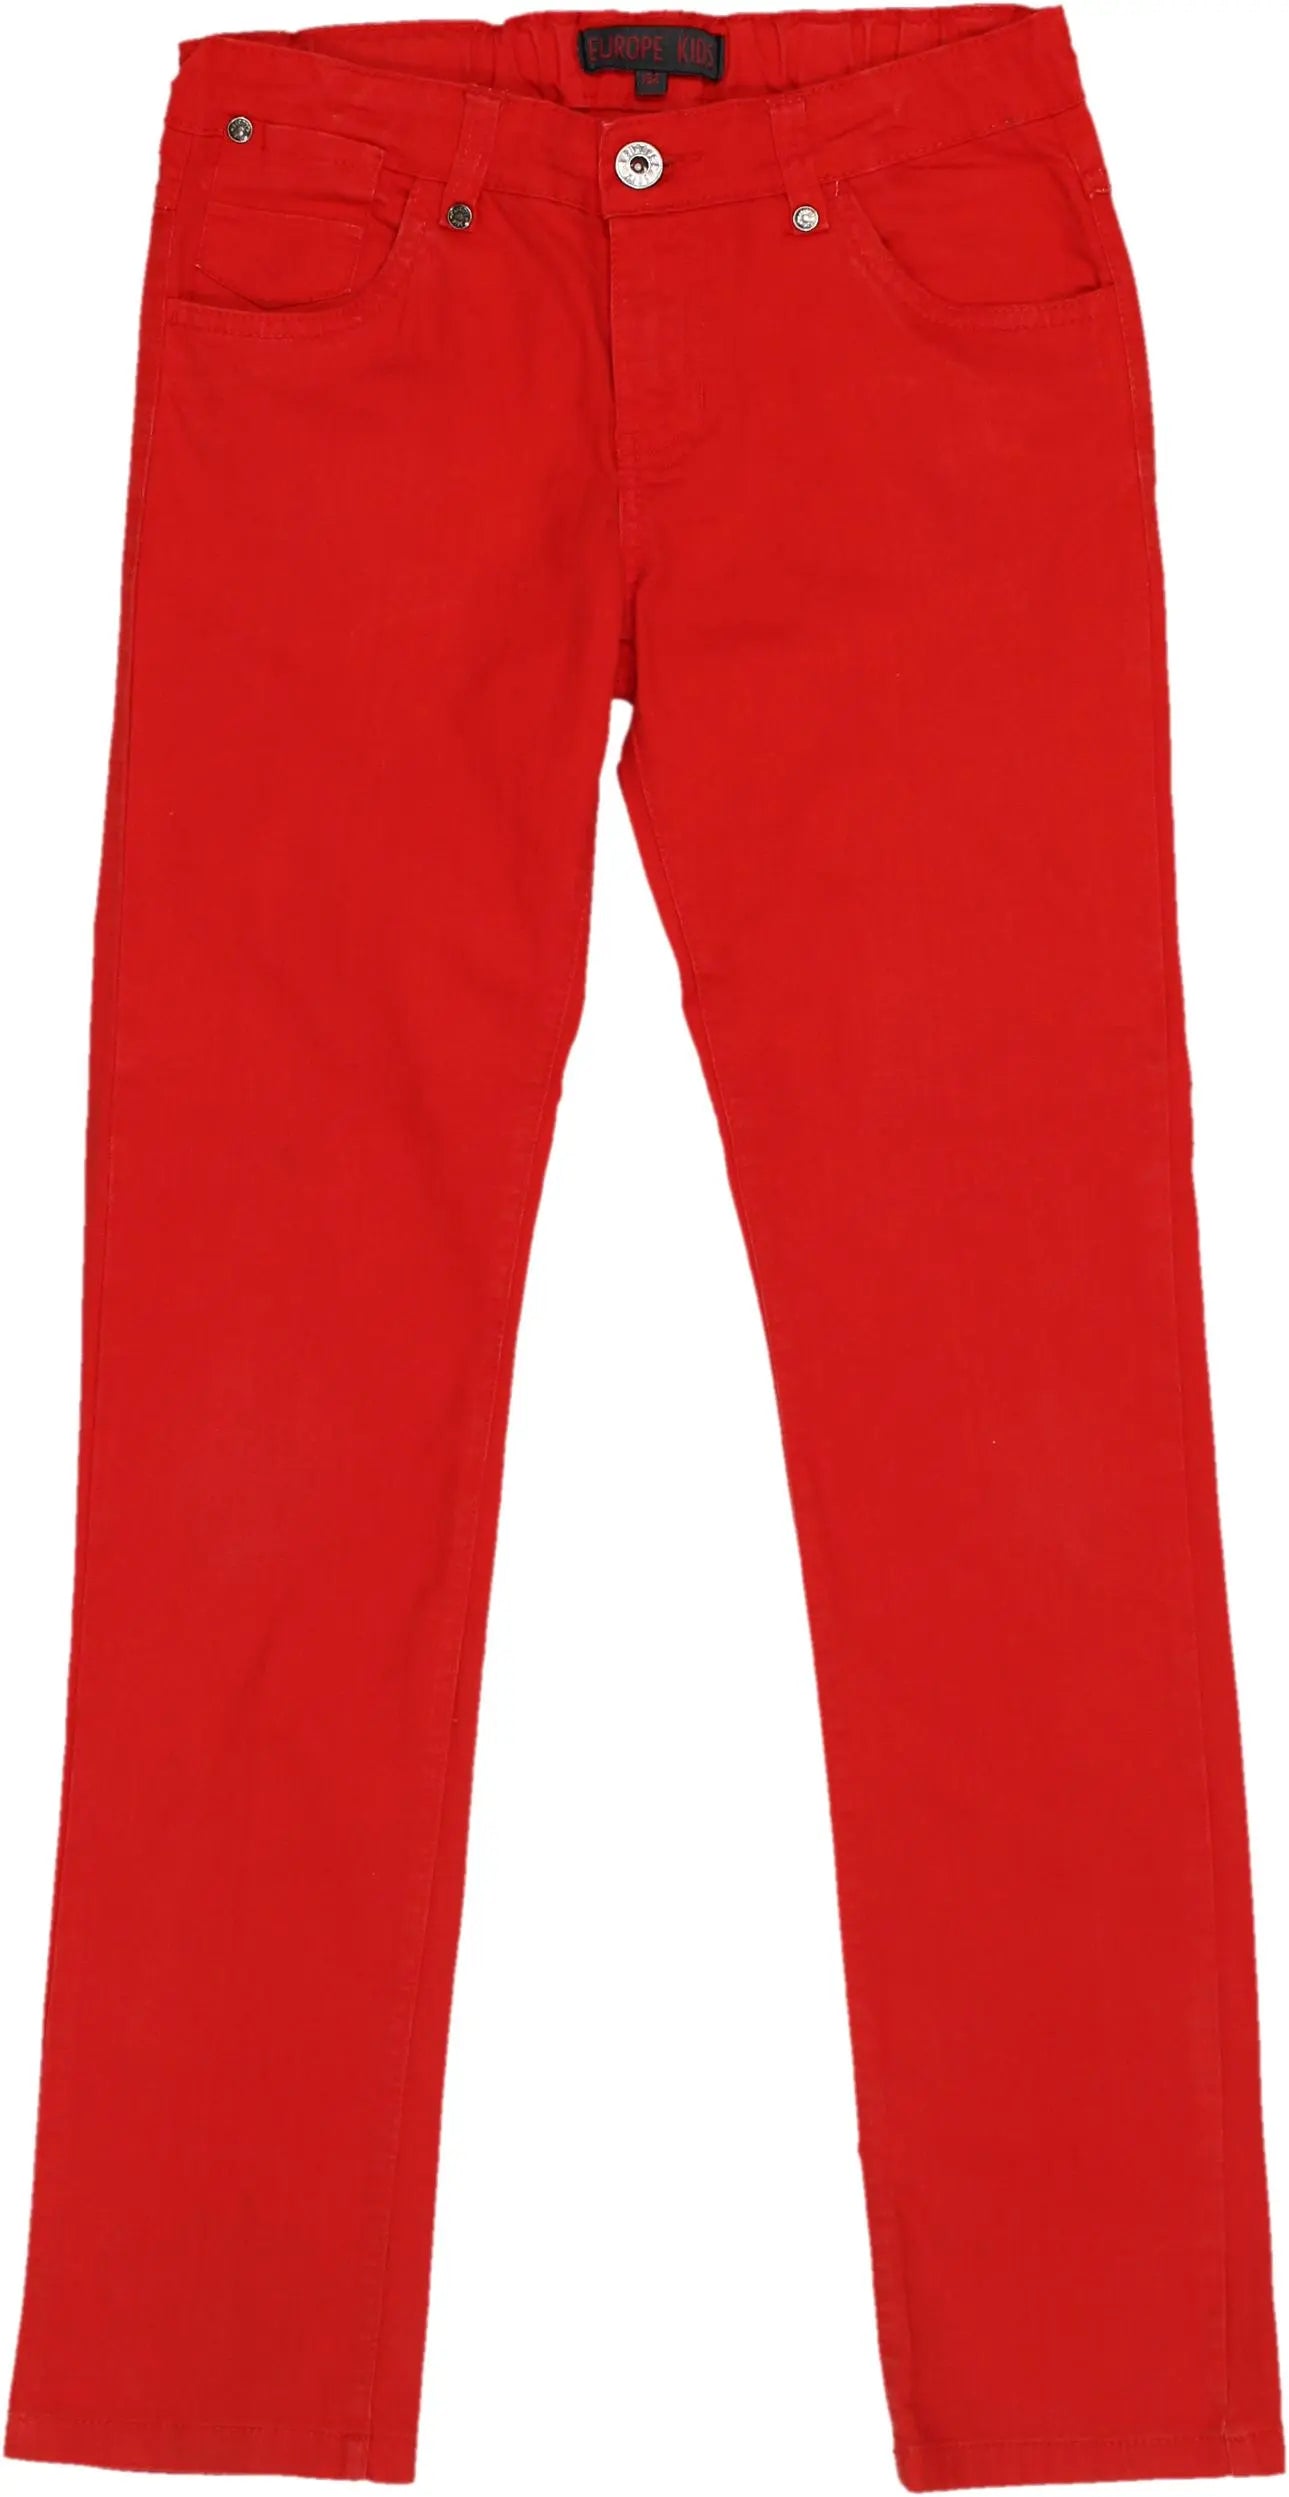 Europe Kids - Red Skinny Jeans- ThriftTale.com - Vintage and second handclothing